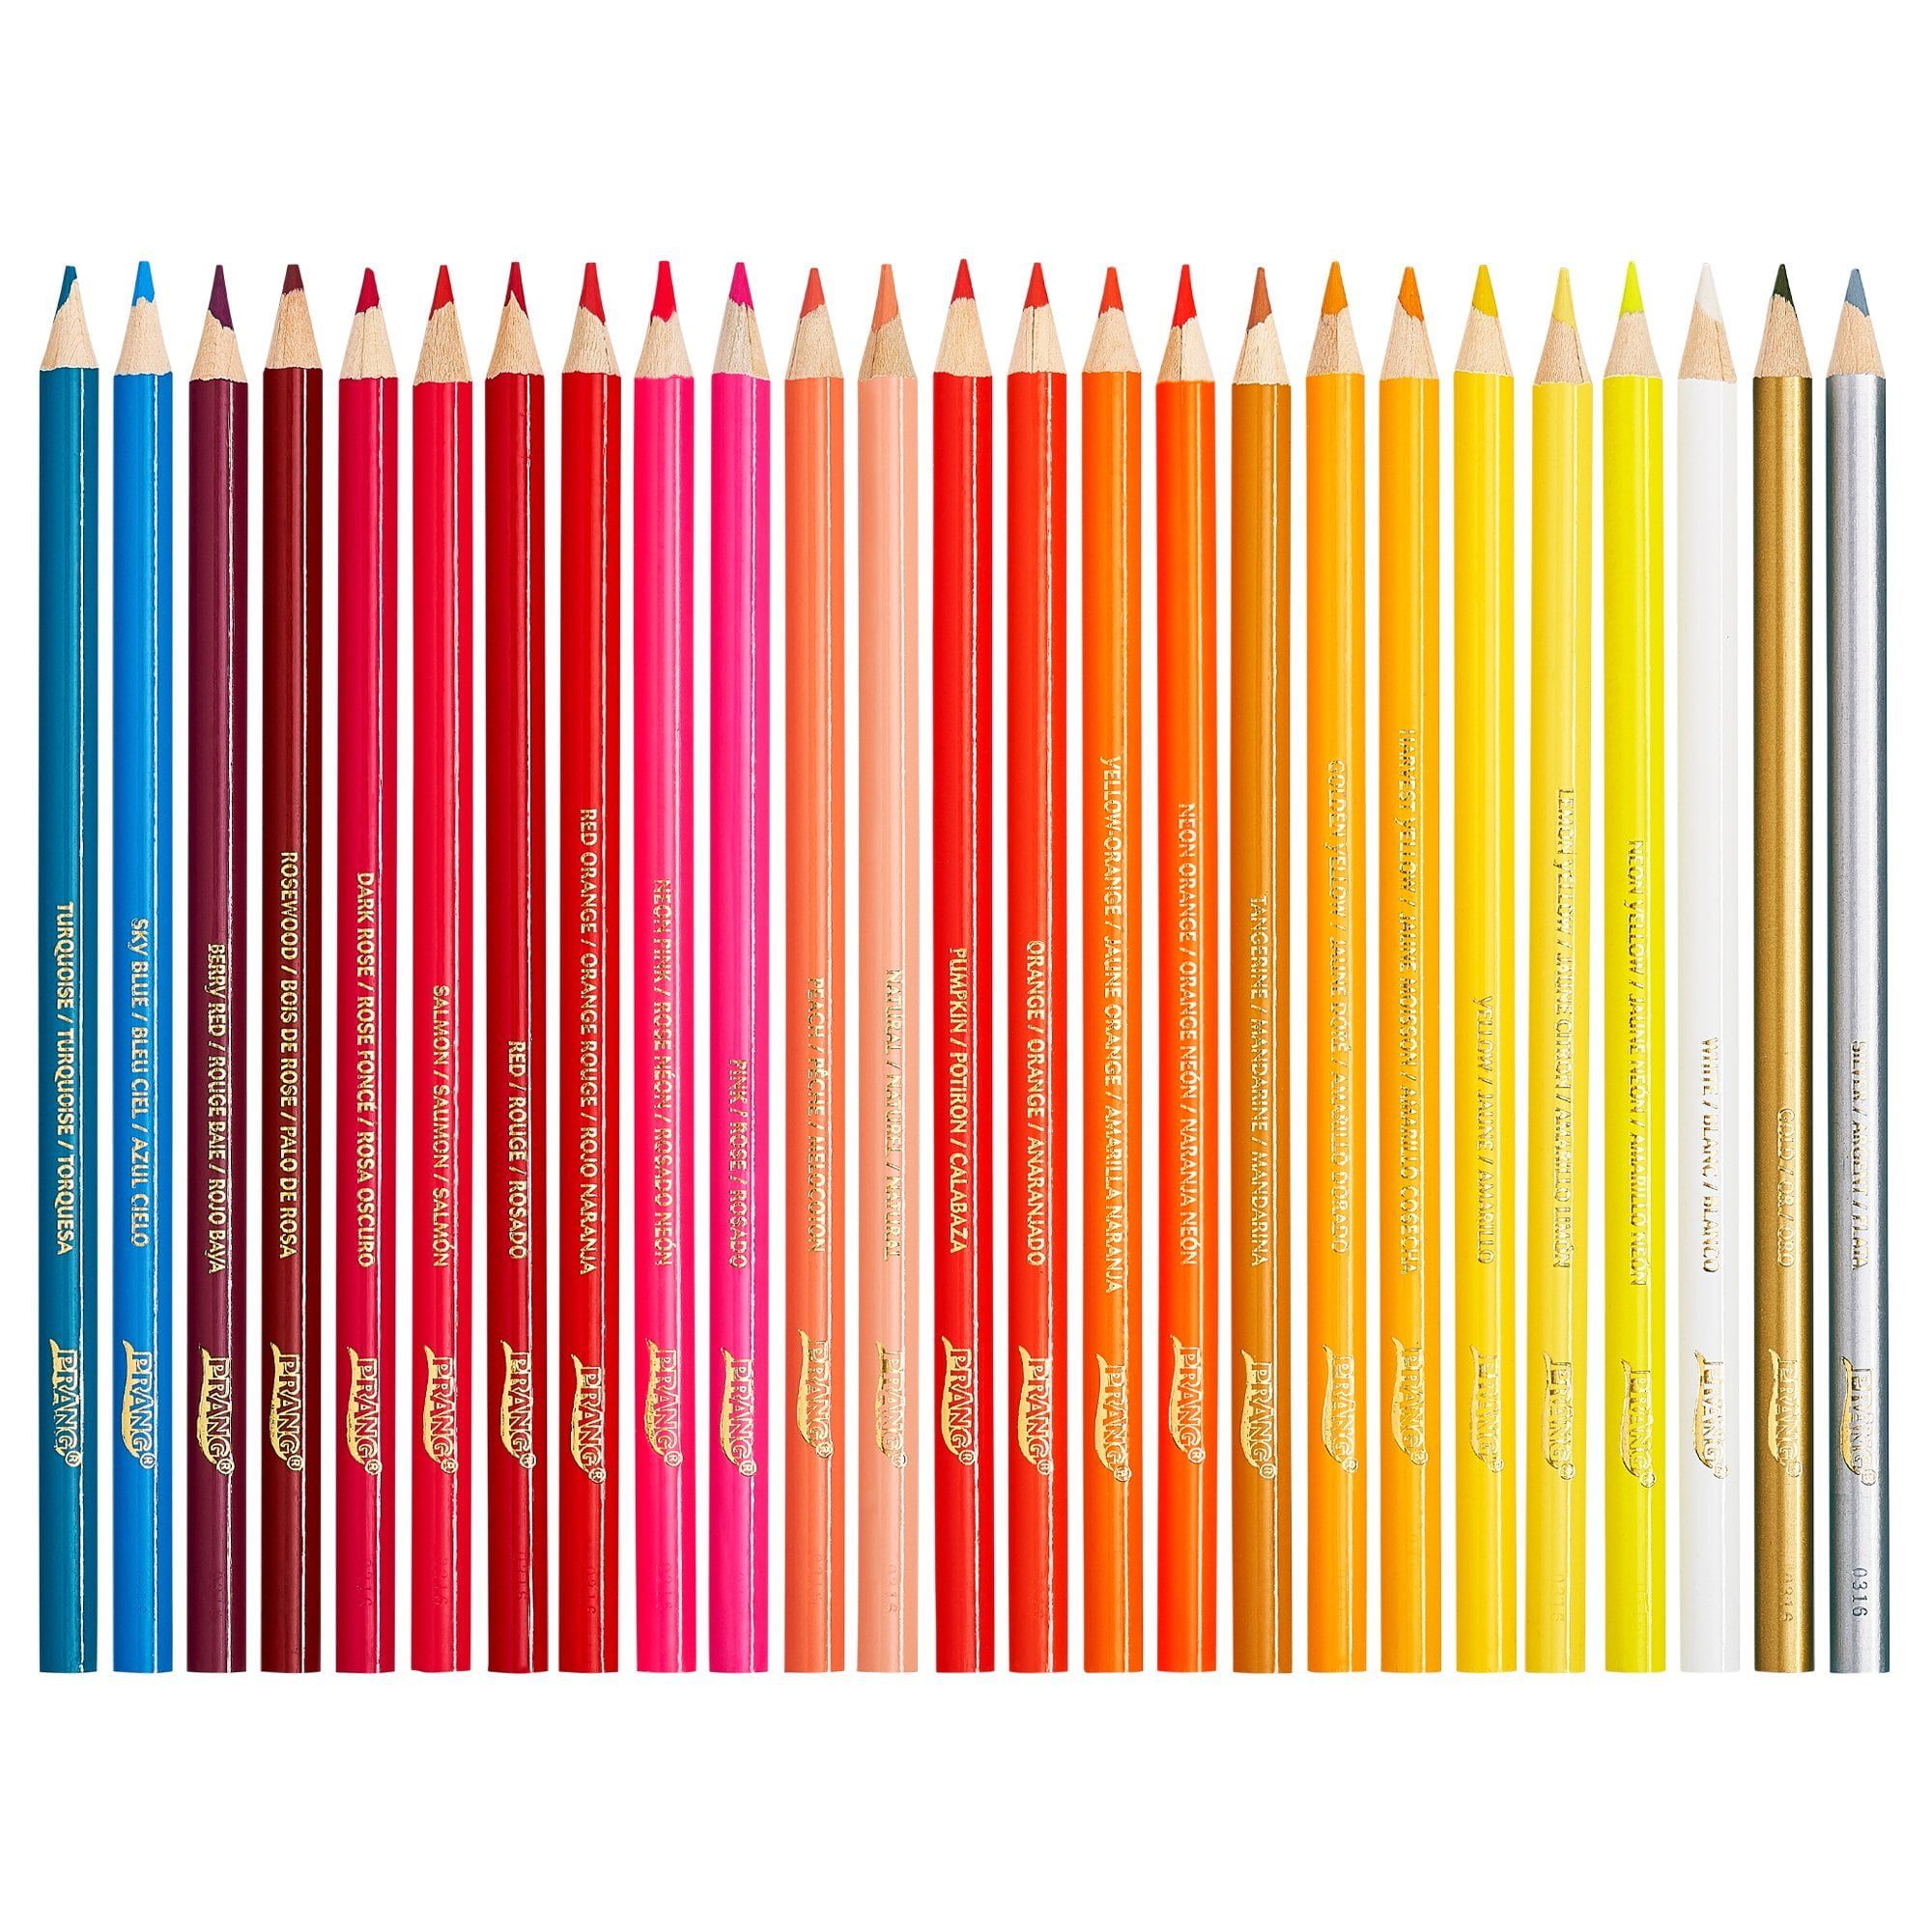 Prang Colored Woodcase Pencils Set, 3.3 mm, Assorted Colors - 50 count